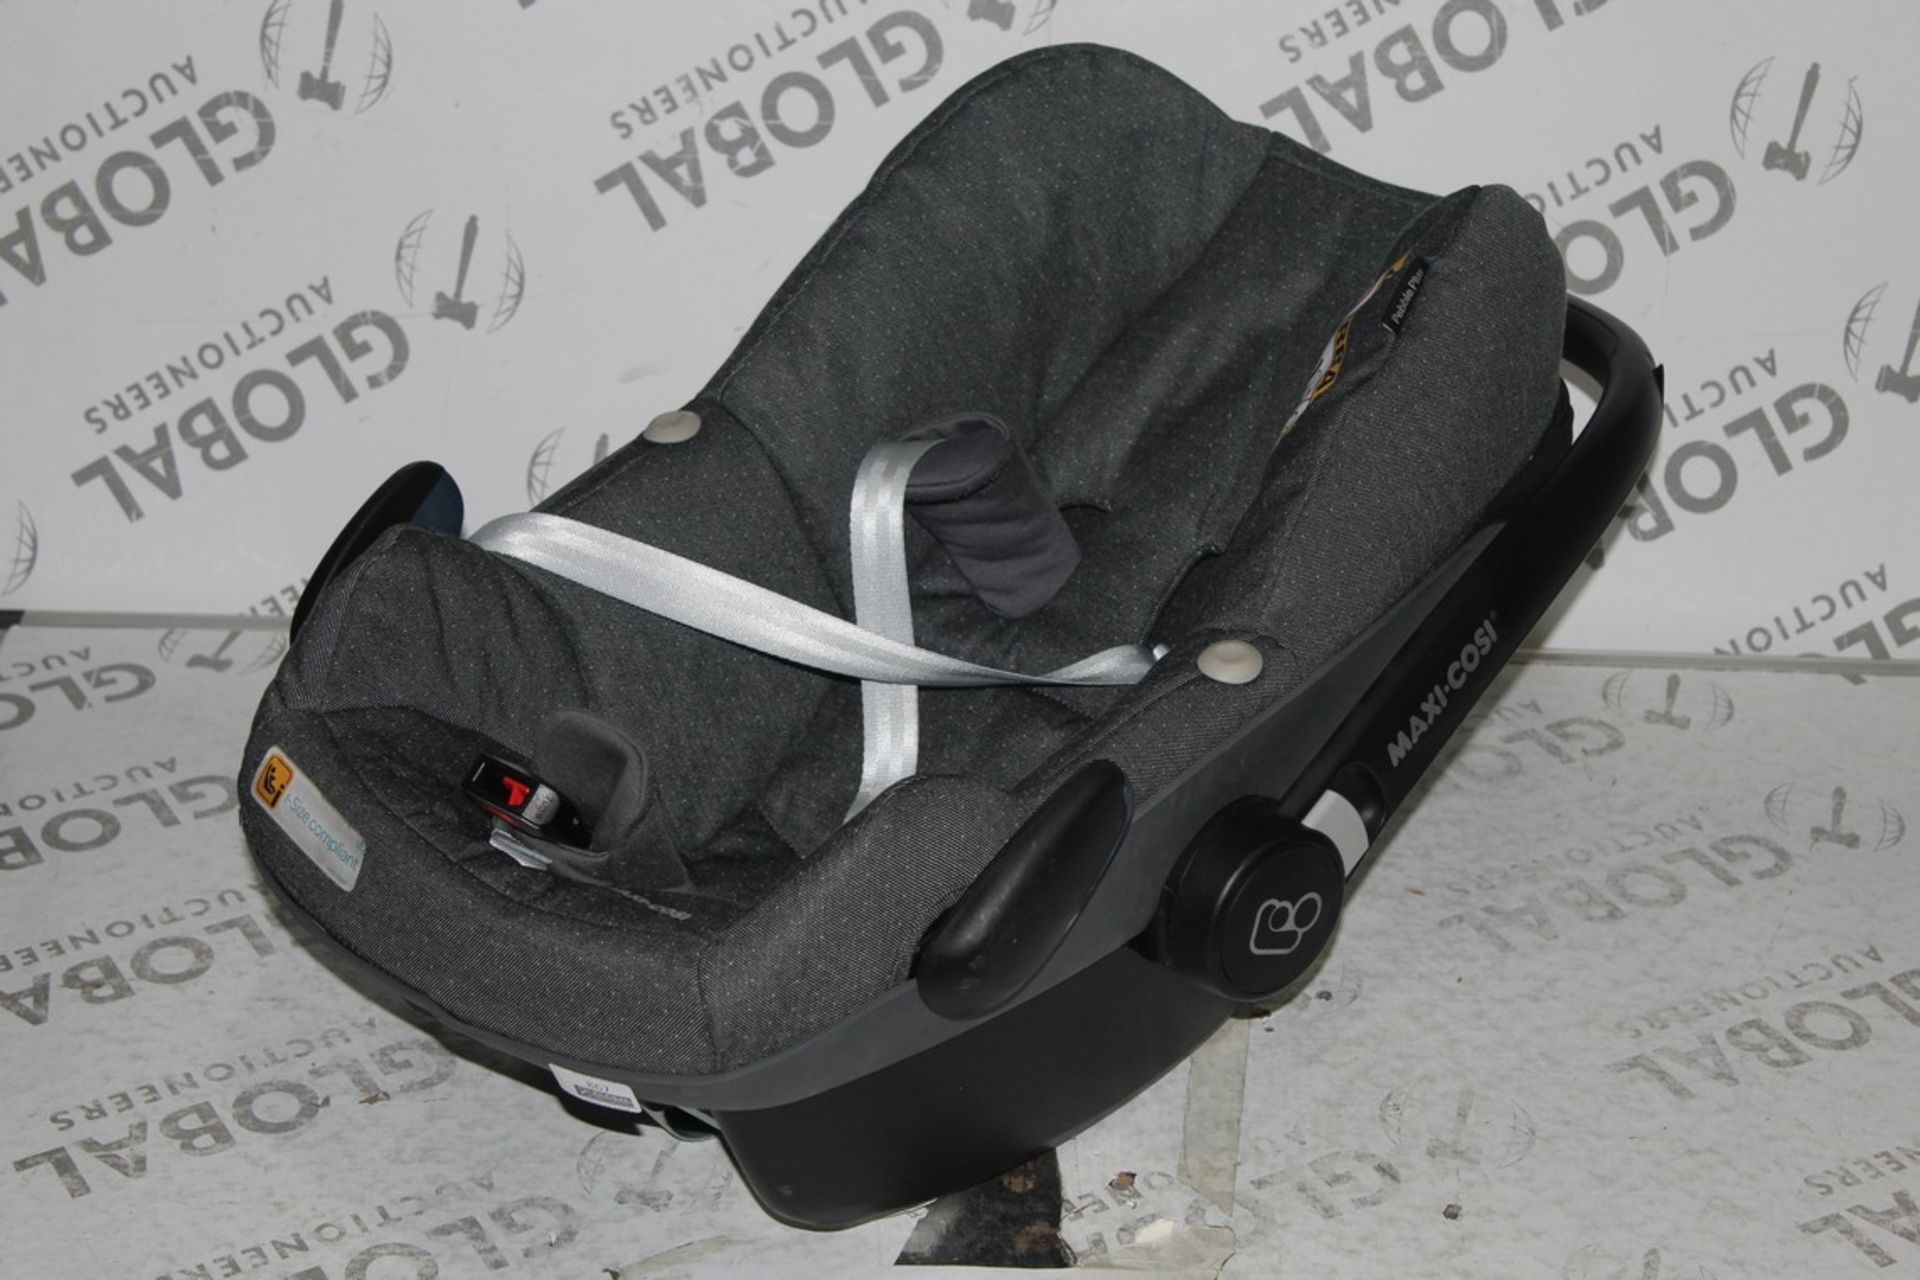 Maxi Cosy Universal Isofix Newborn In Car Kids Safety Seat RRP £140 (RET00673545) (Public Viewing